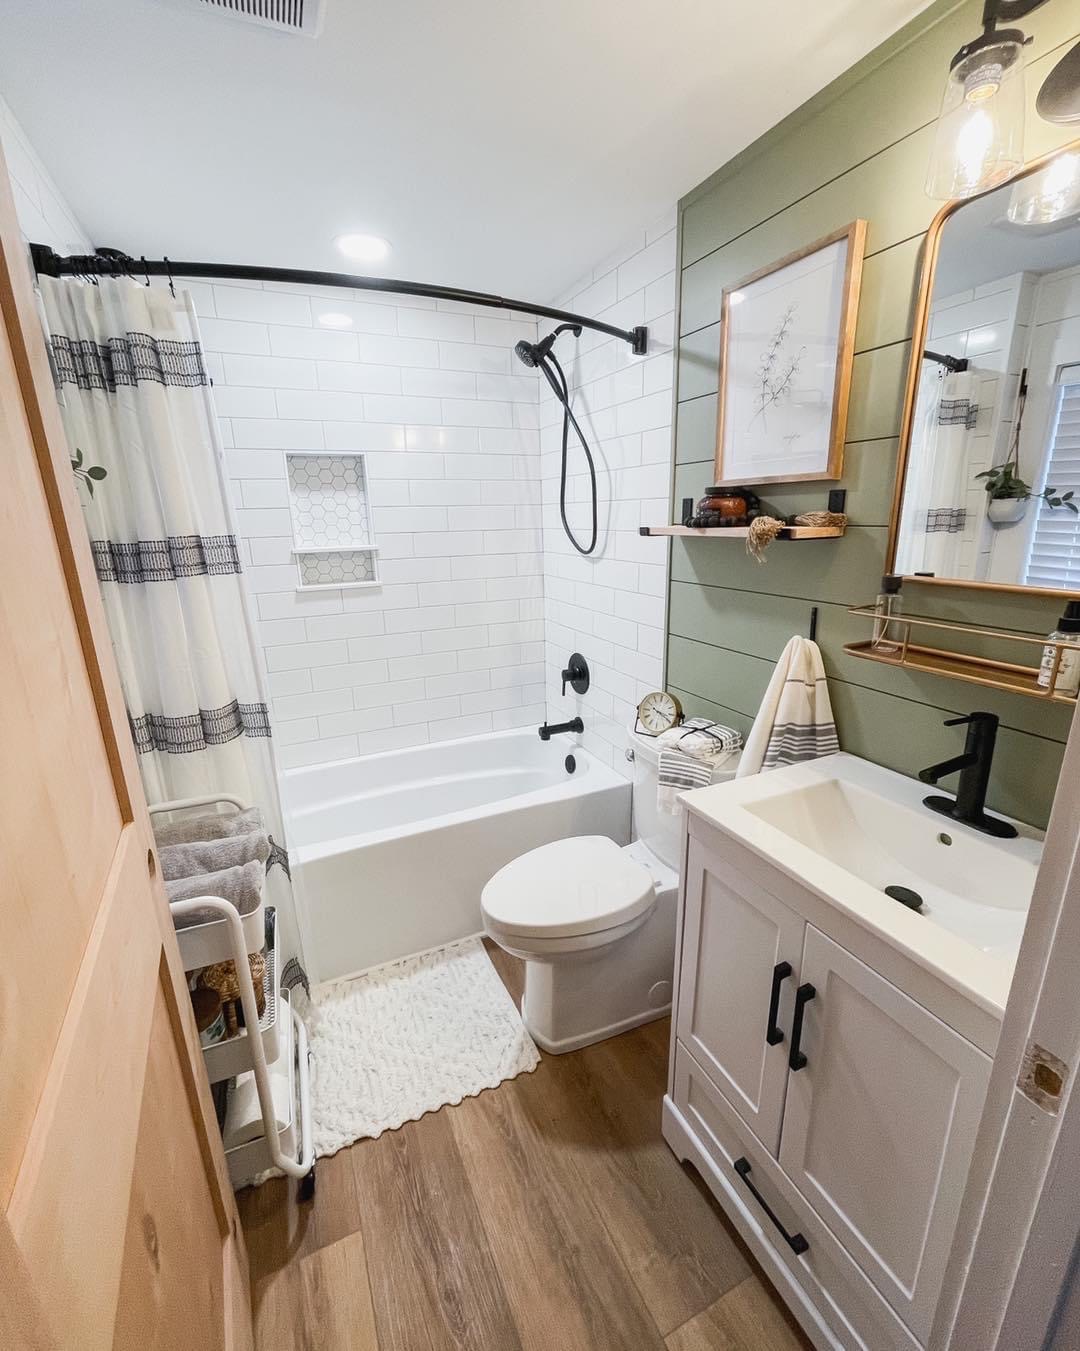 Midwest Remodel specializes in bathroom renovations for your home.